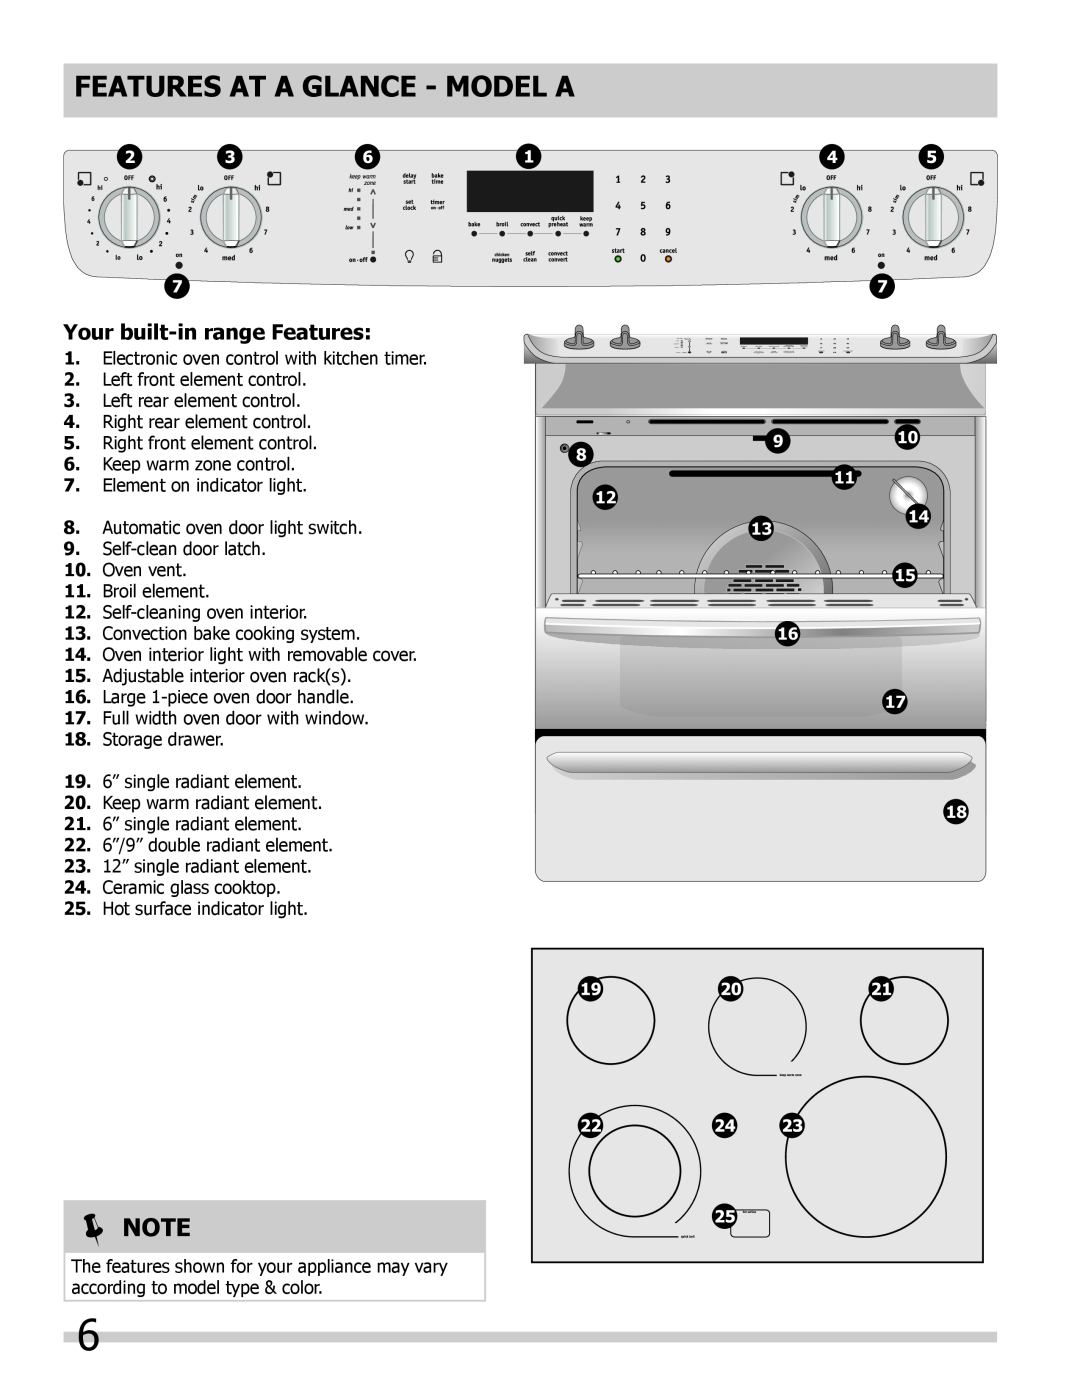 Frigidaire FPES3085KF, FGES3065KF, FGES3065KB Features At A Glance - Model A, Your built-in range Features, 1516,  Note 